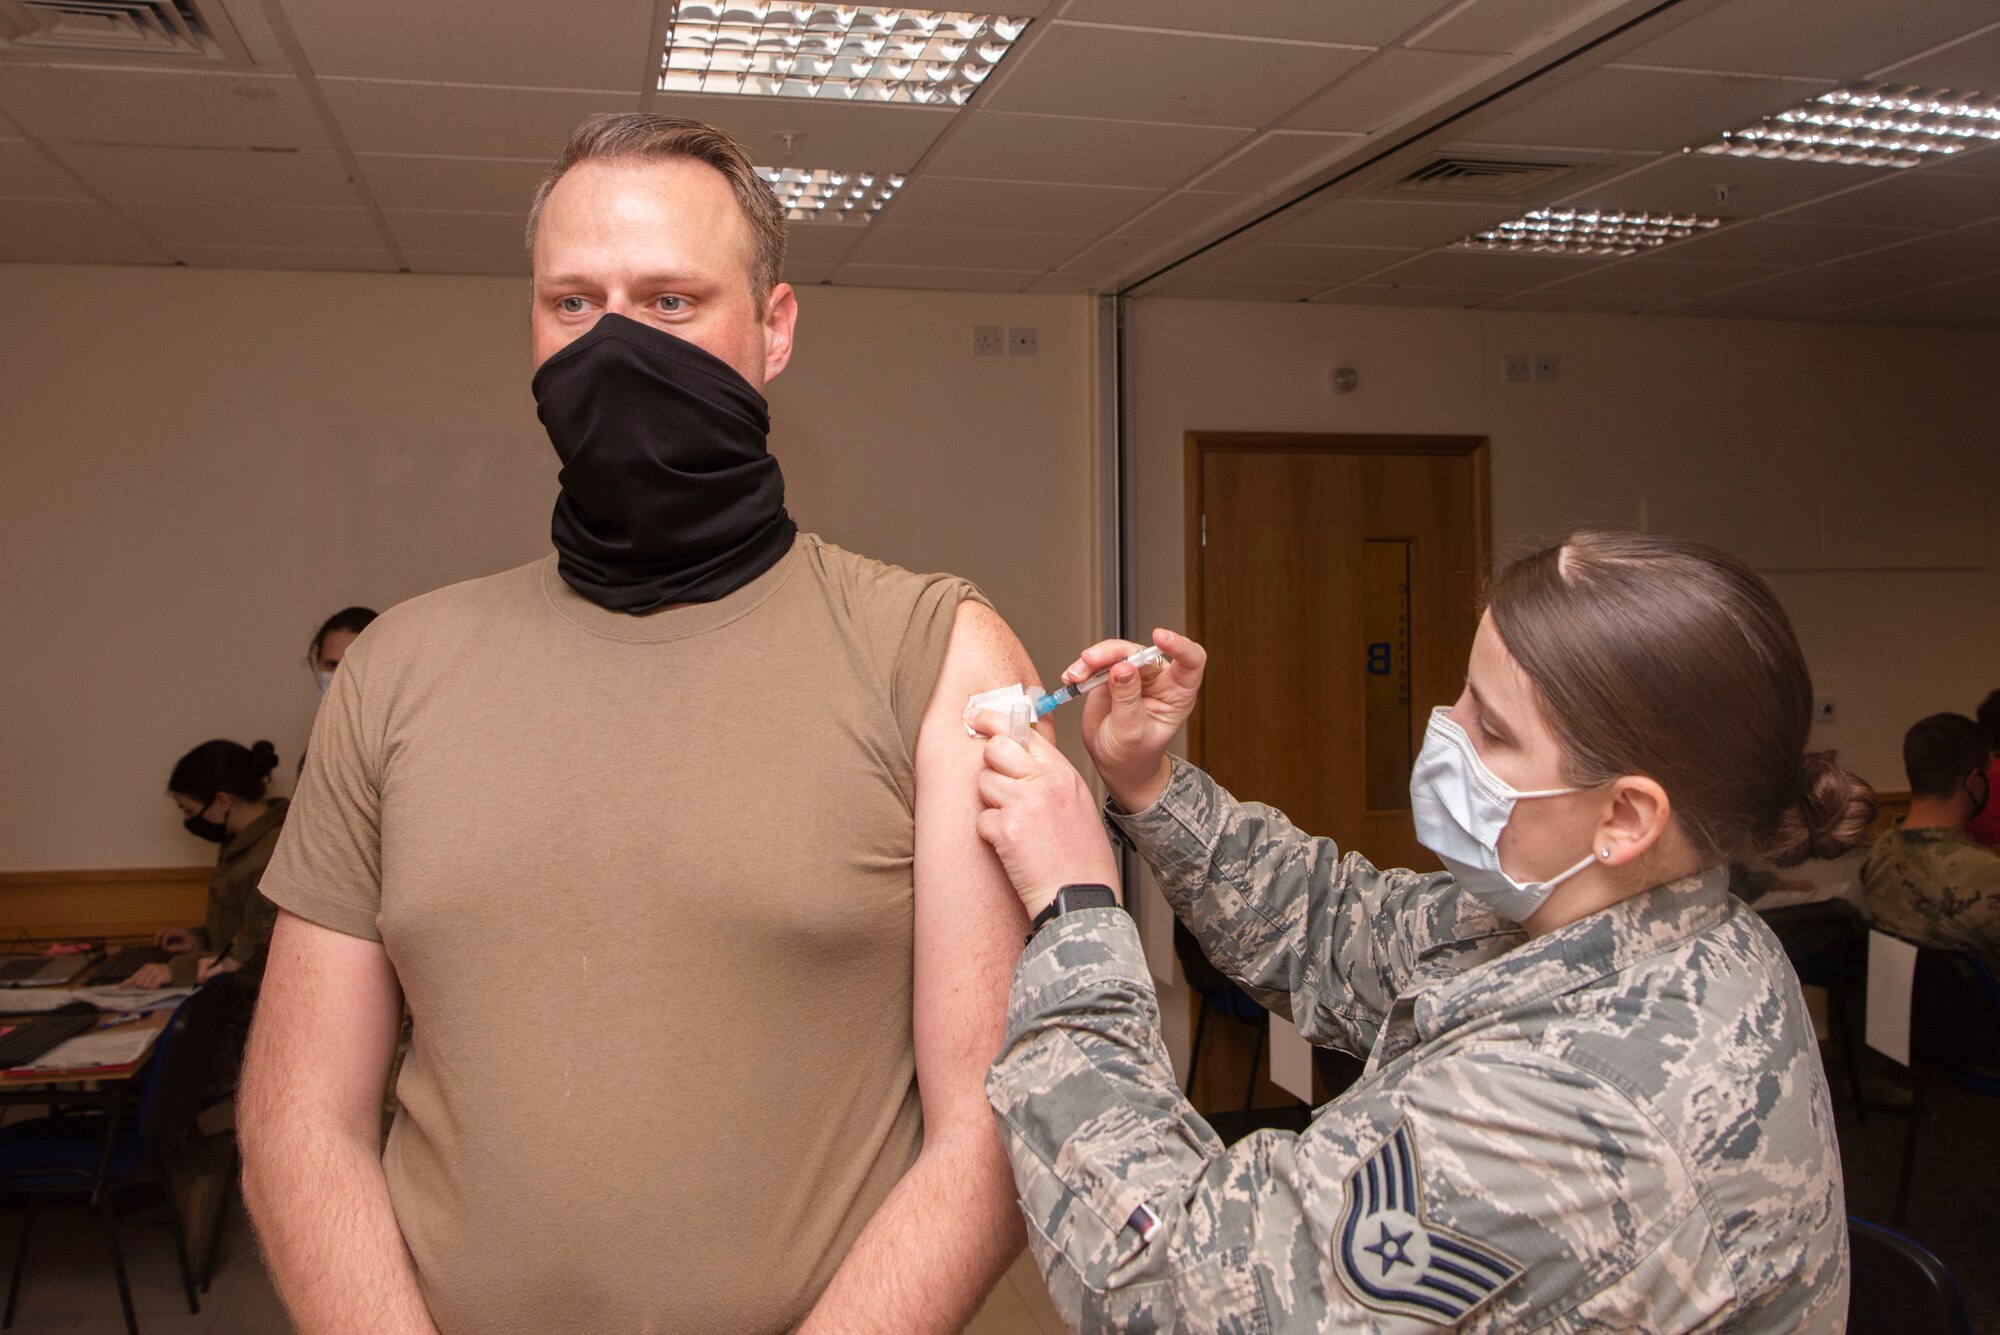 U.S. Air Force Staff Sgt. Anna Murray, 48th Healthcare Operations Squadron immunizations technician, administers a dose of the COVID-19 vaccine to a Team Mildenhall Airman Jan. 5, 2021, at Royal Air Force Lakenheath, England. Medical personnel, individuals maintaining national security and installation functions, deploying forces and those at high risk will be the first to receive the vaccine. (U.S. Air Force photo by Senior Airman Joseph Barron)